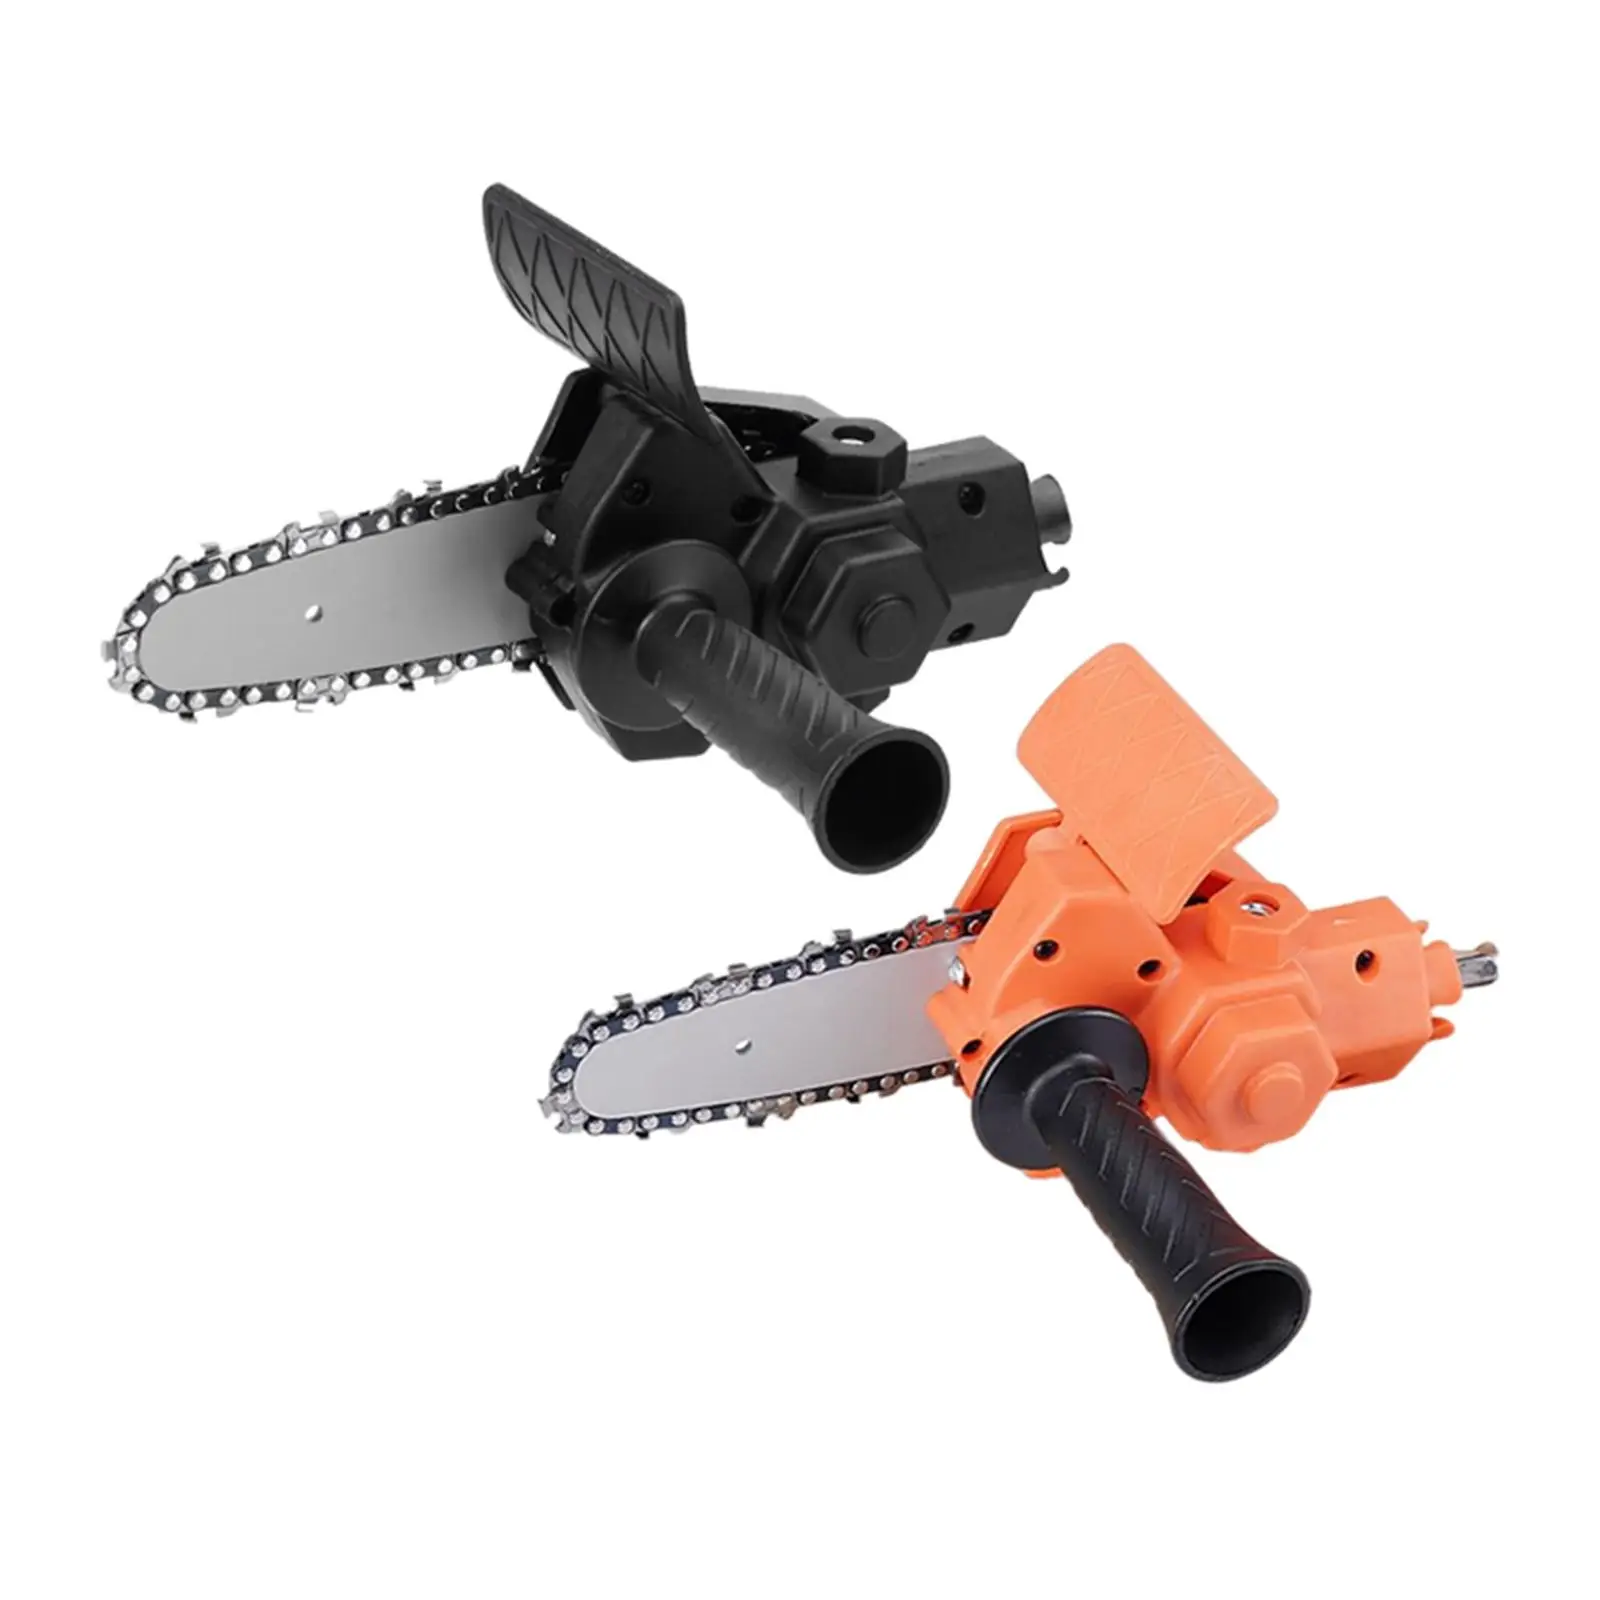 Portable Mini Electric Chainsaw Saw Wood Cutter One Hand Power Tool for Logging Trimming Branch Pruning Shears Garden